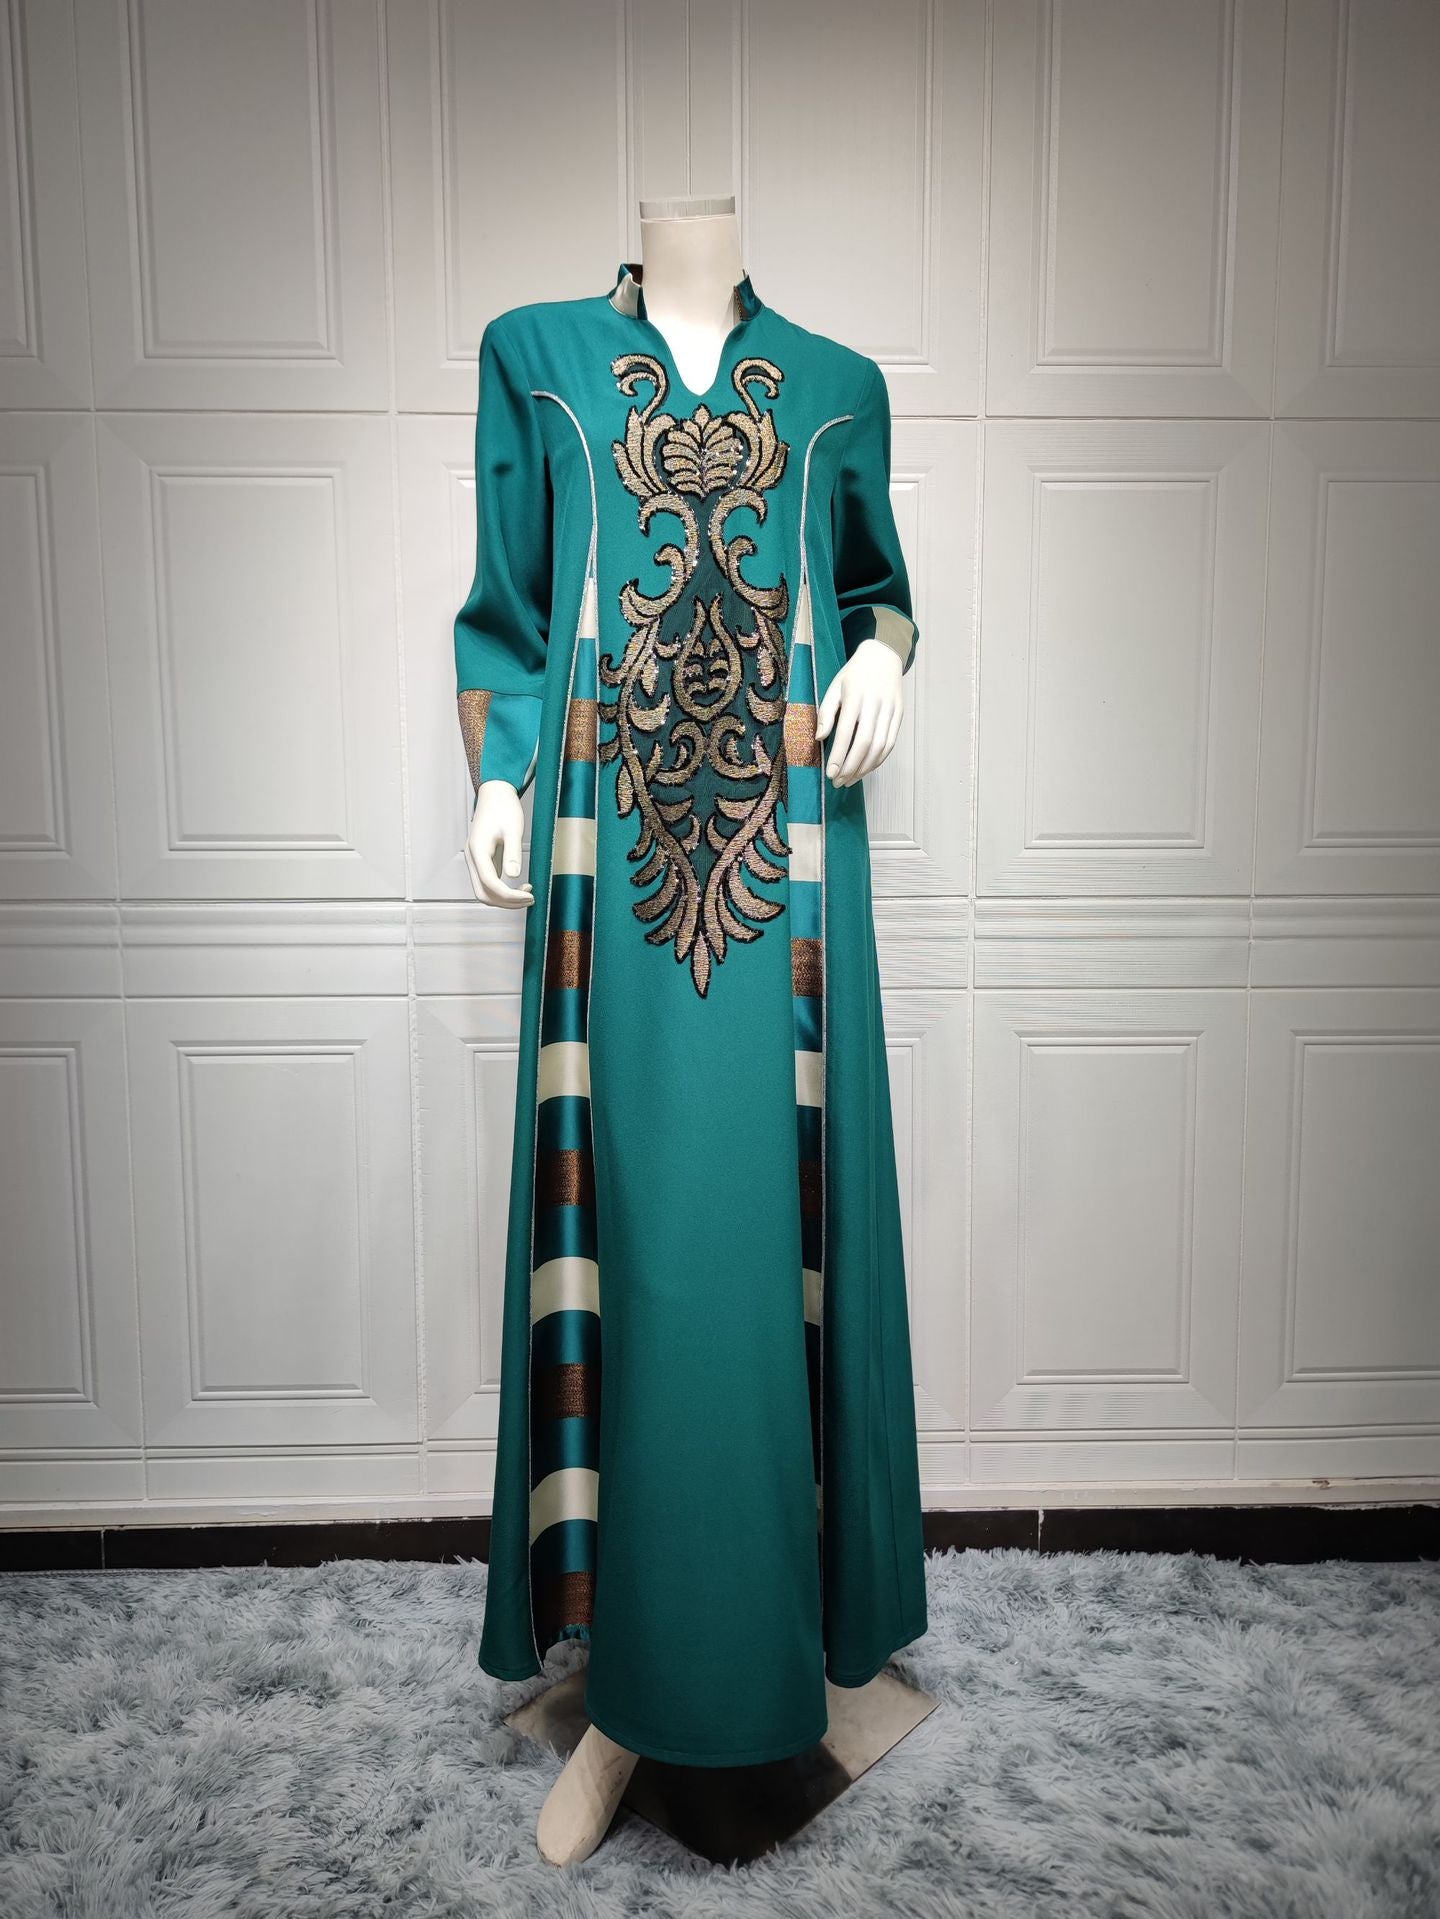 Women's Embroidered Striped Robe Dress